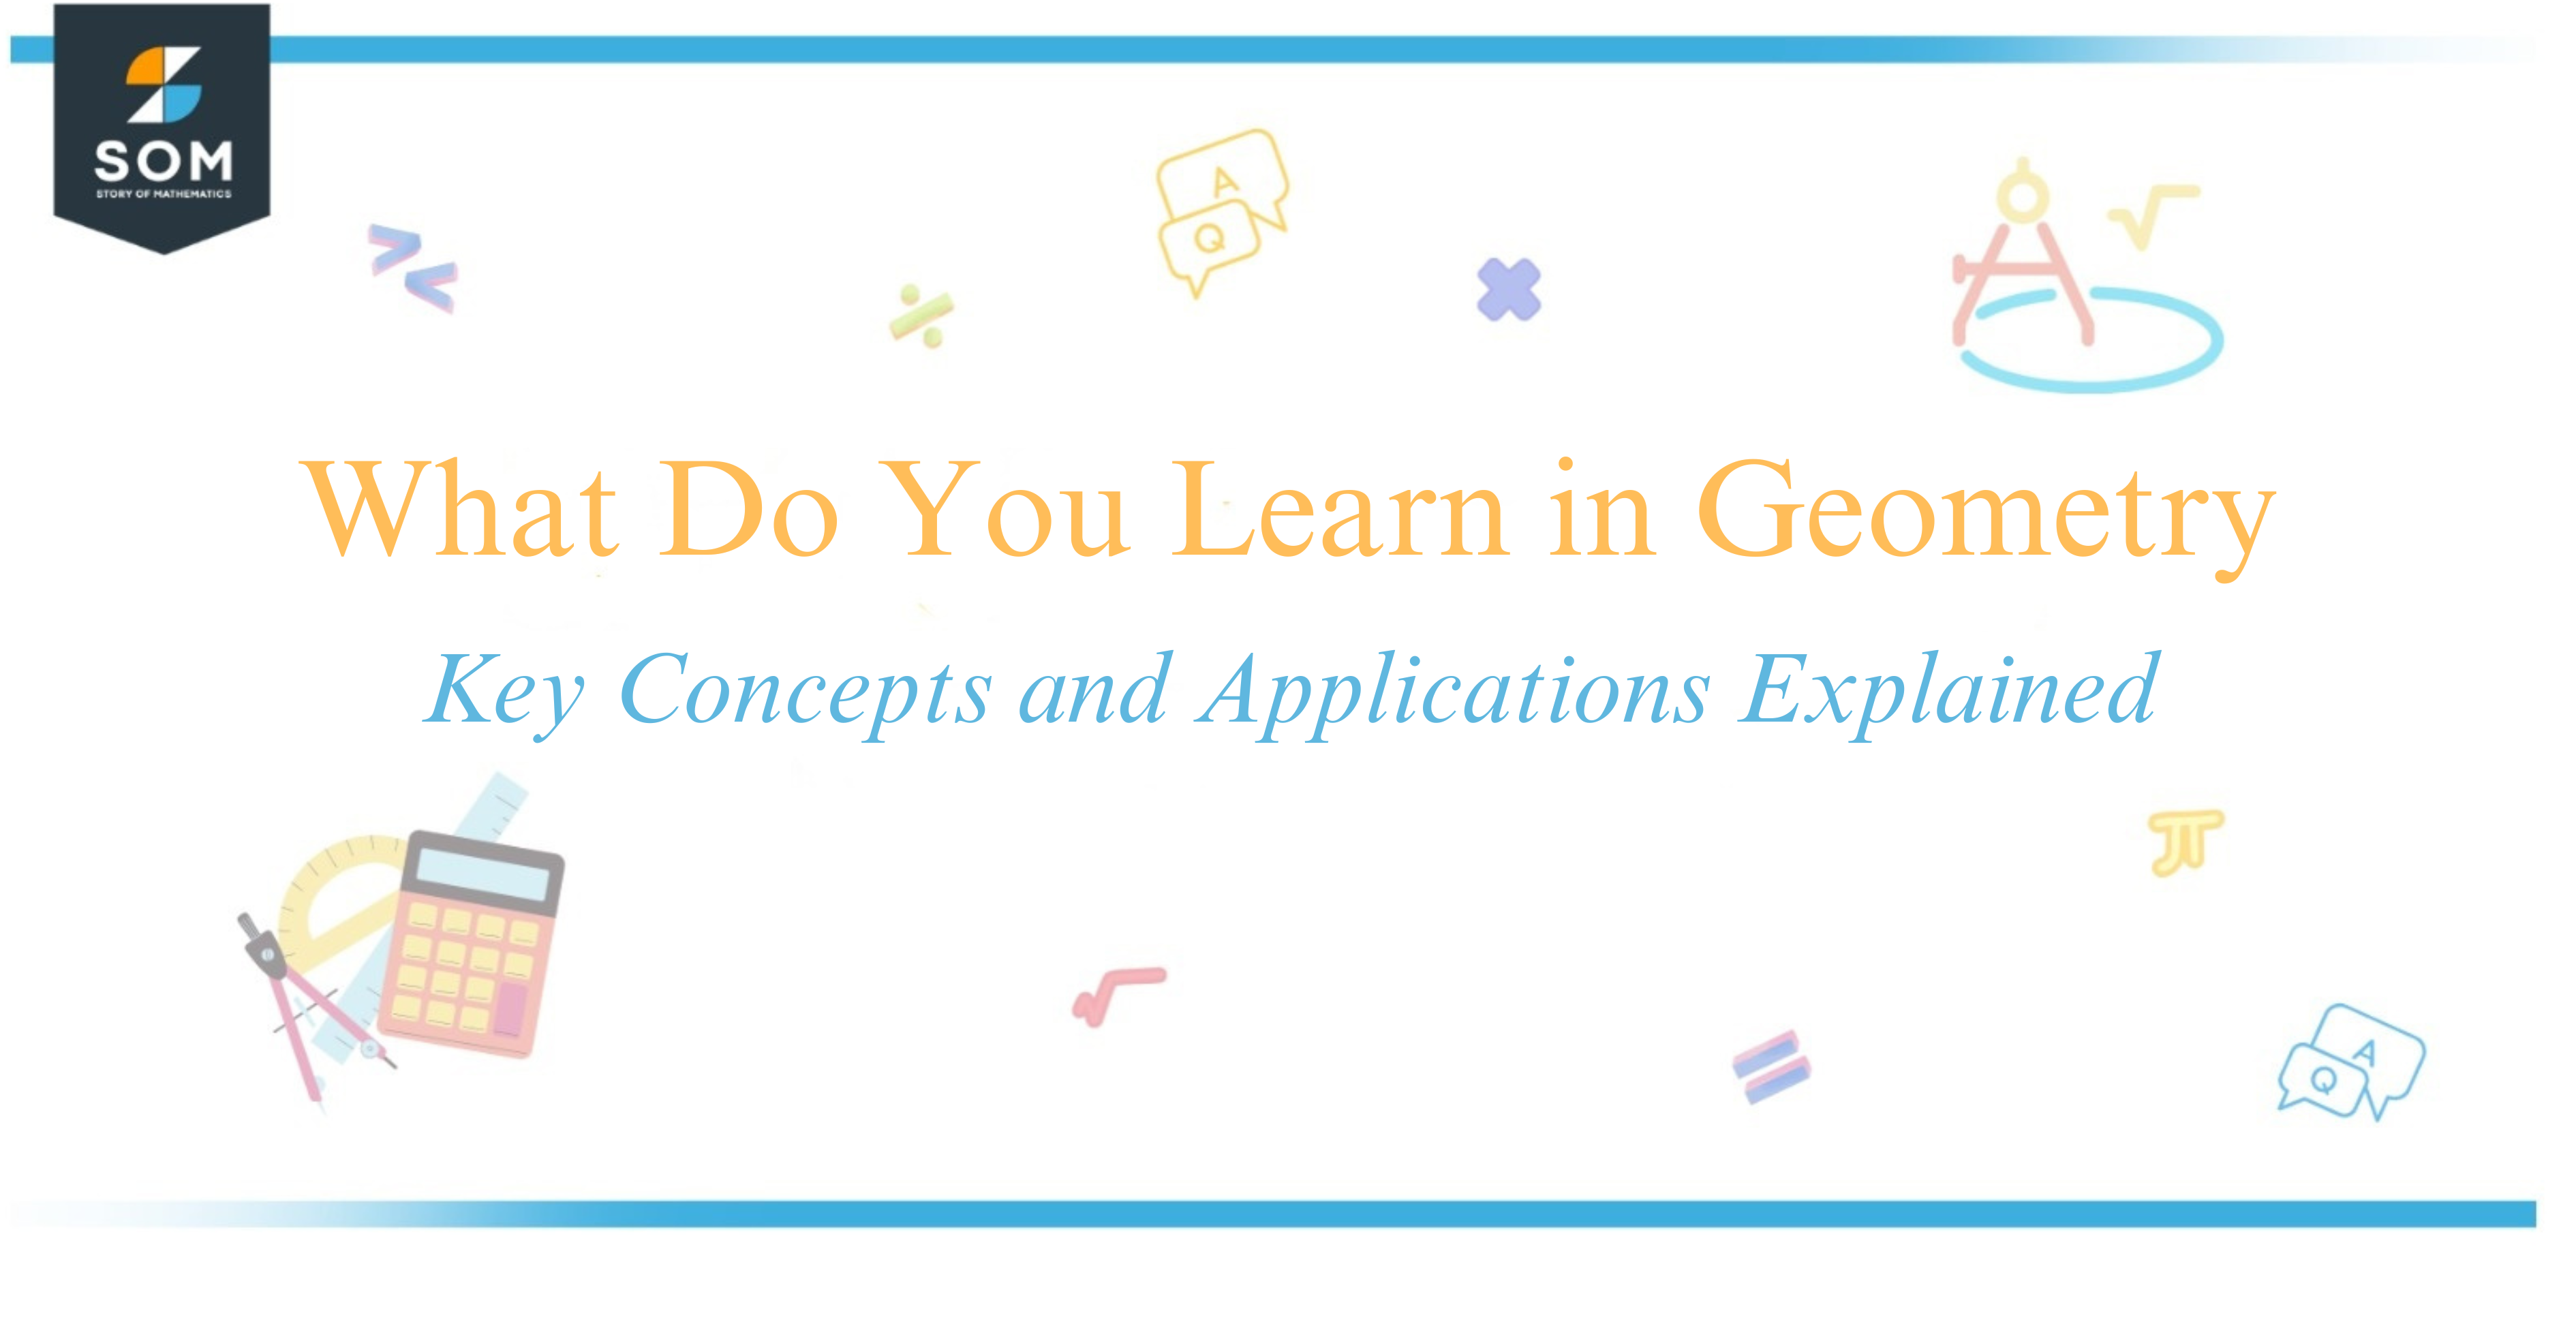 What Do You Learn in Geometry Key Concepts and Applications Explained